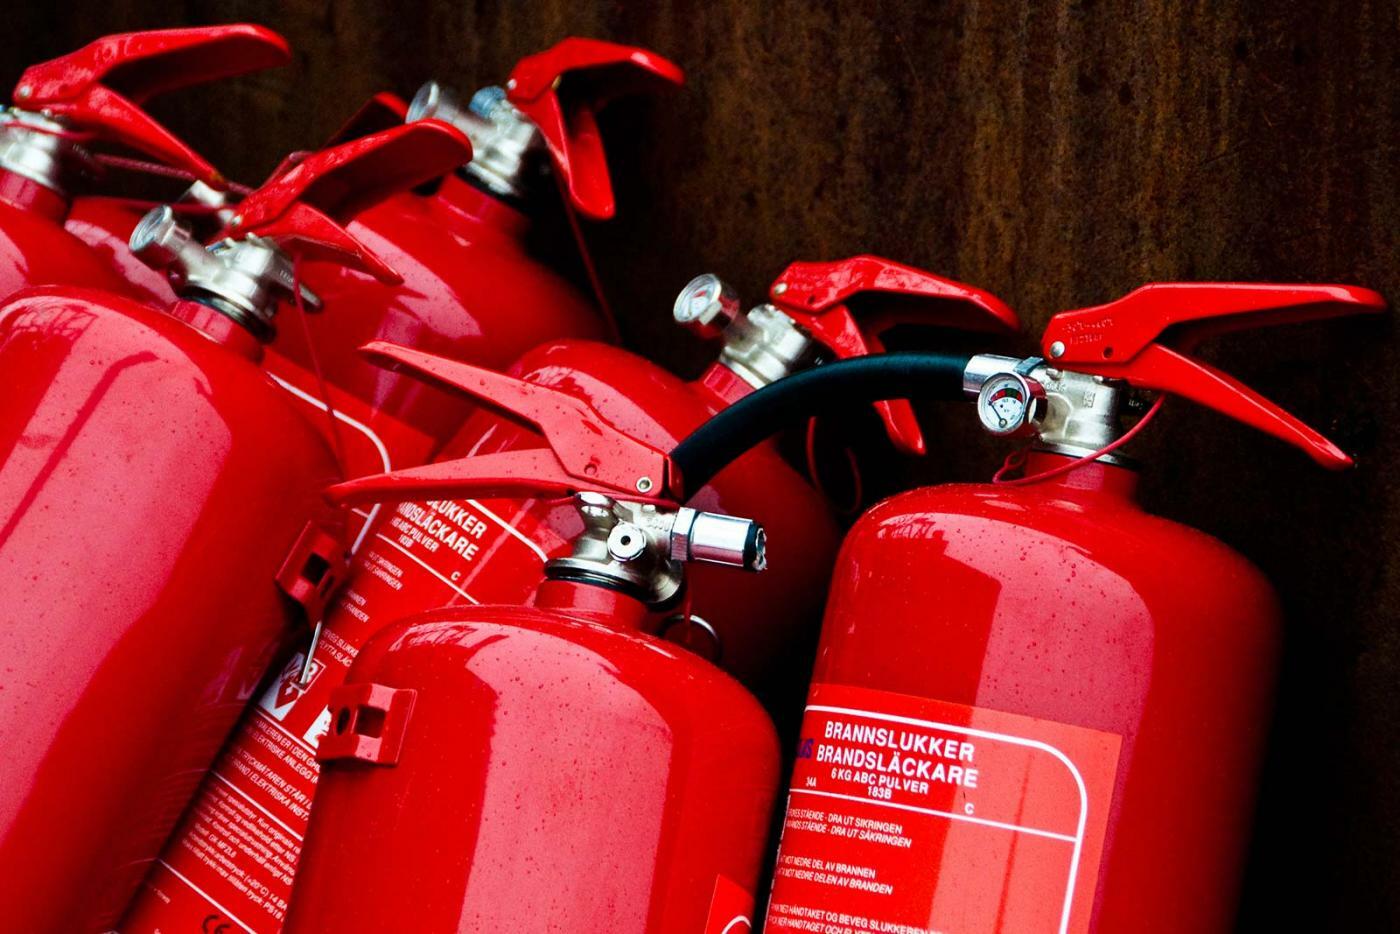 Maintenance of fire extinguishing modes and fire extinguishers